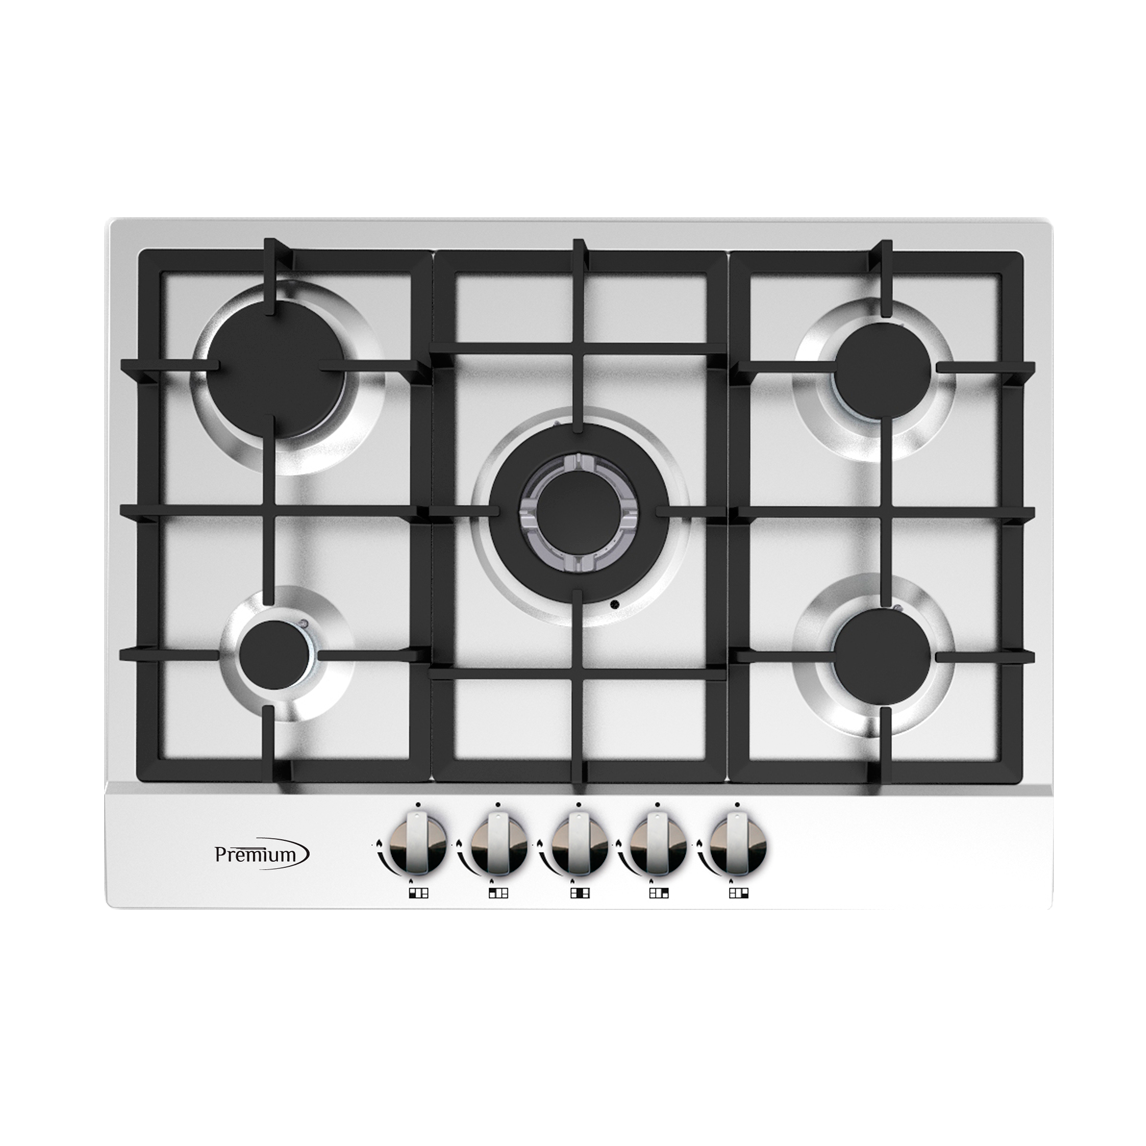 Premium Levella® 28''- 5 Burners Built In Gas Stove. Stainless steel panel.